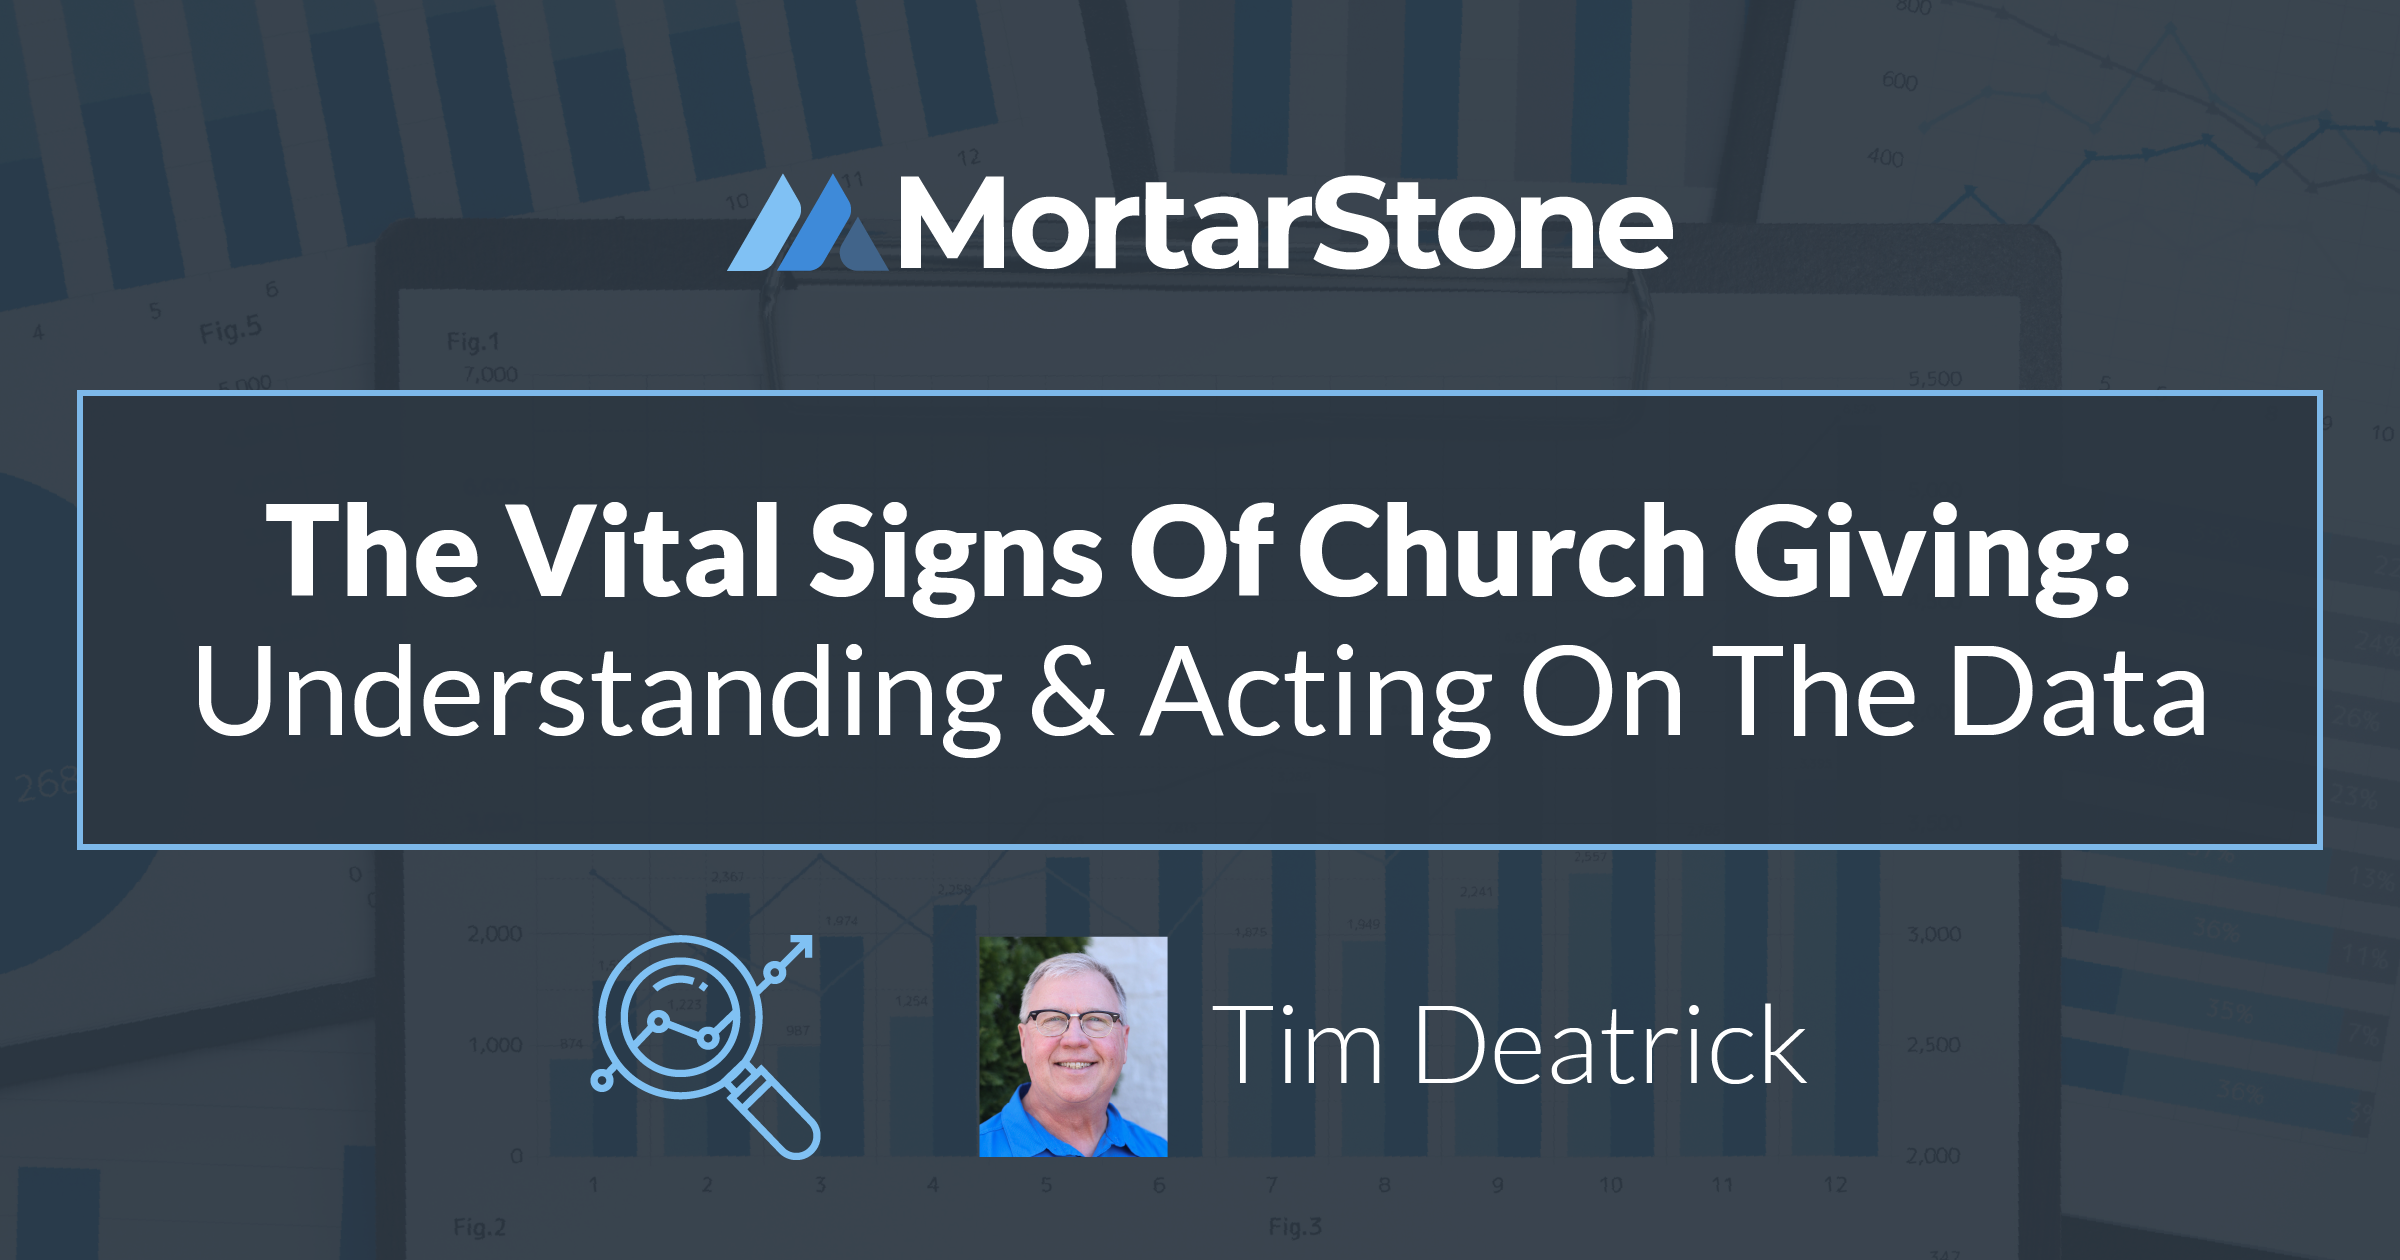 Blog thumbnail featuring the title 'The Vital Signs Of Church Giving: Understanding & Acting On The Data' overlaid on a background with graphical elements and charts. Below the title is the name 'Tim Deatrick' with his photo. The logo of MortarStone is visible in the upper left corner.